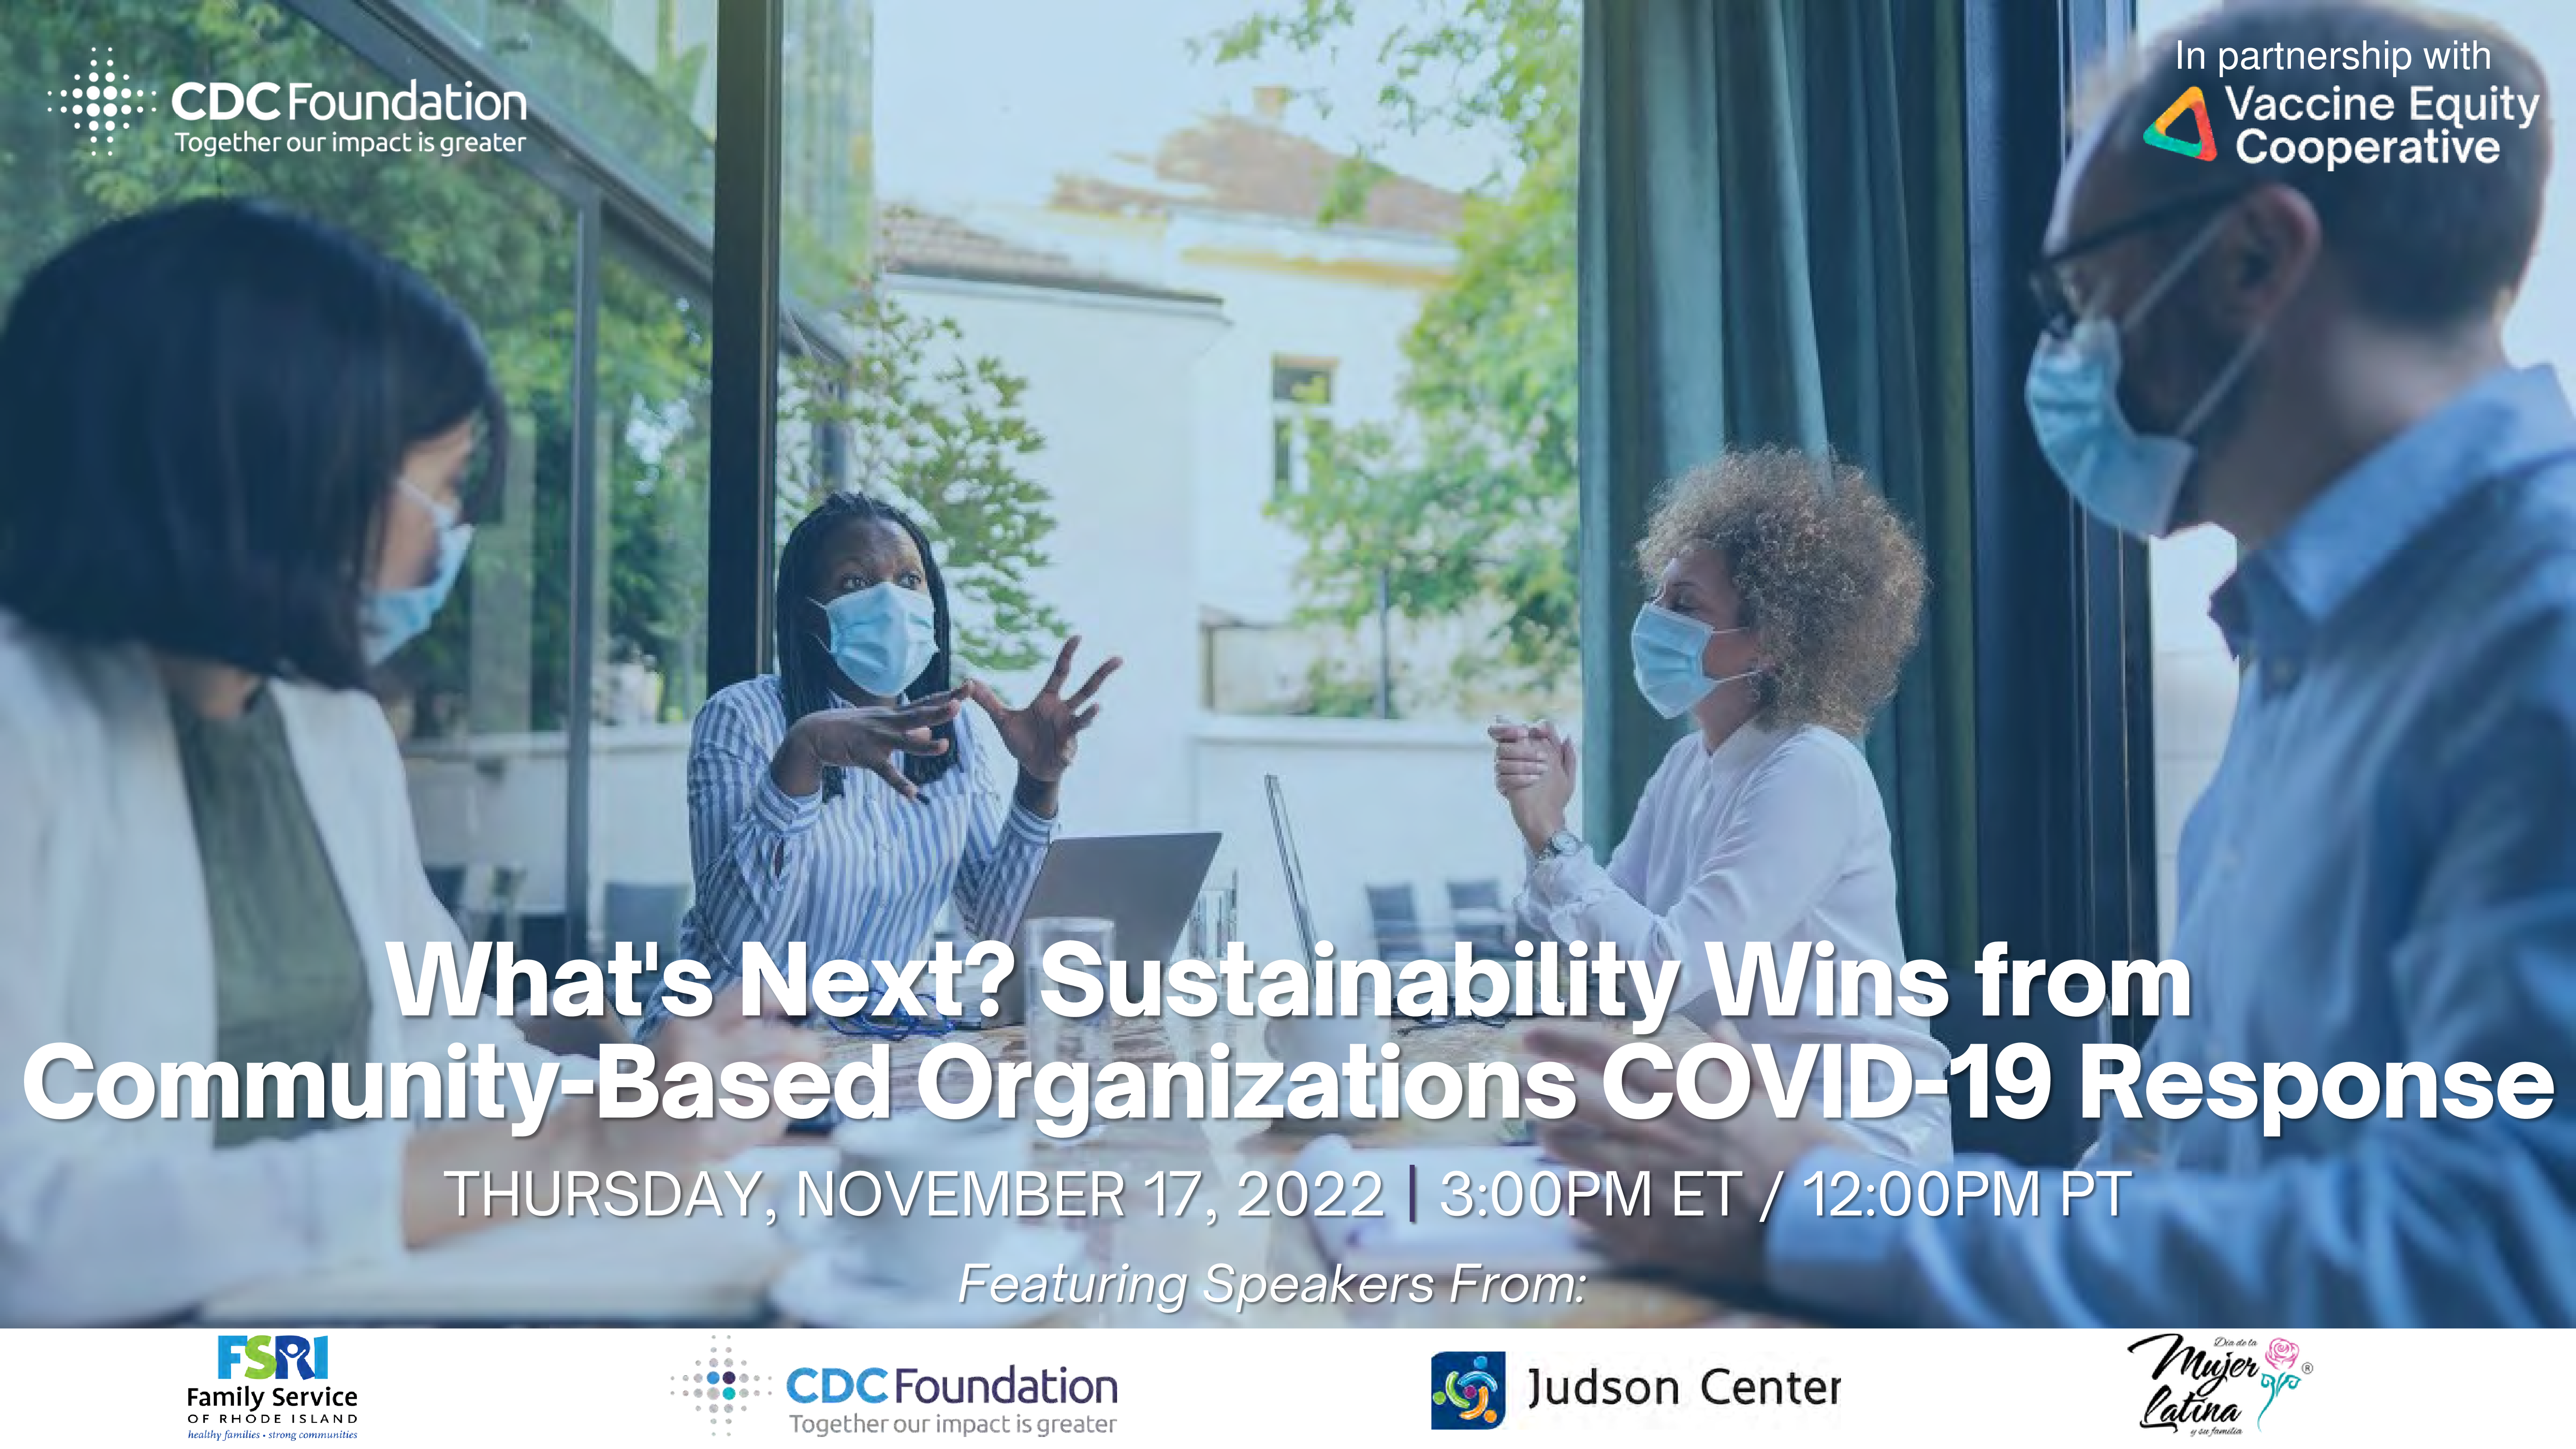 Webinar slide shows four people sitting at a table wearing masks and having a discussion. The slide this is What’s Next? Sustainability Wins from Community-Based Organizations COVID-19 Response.